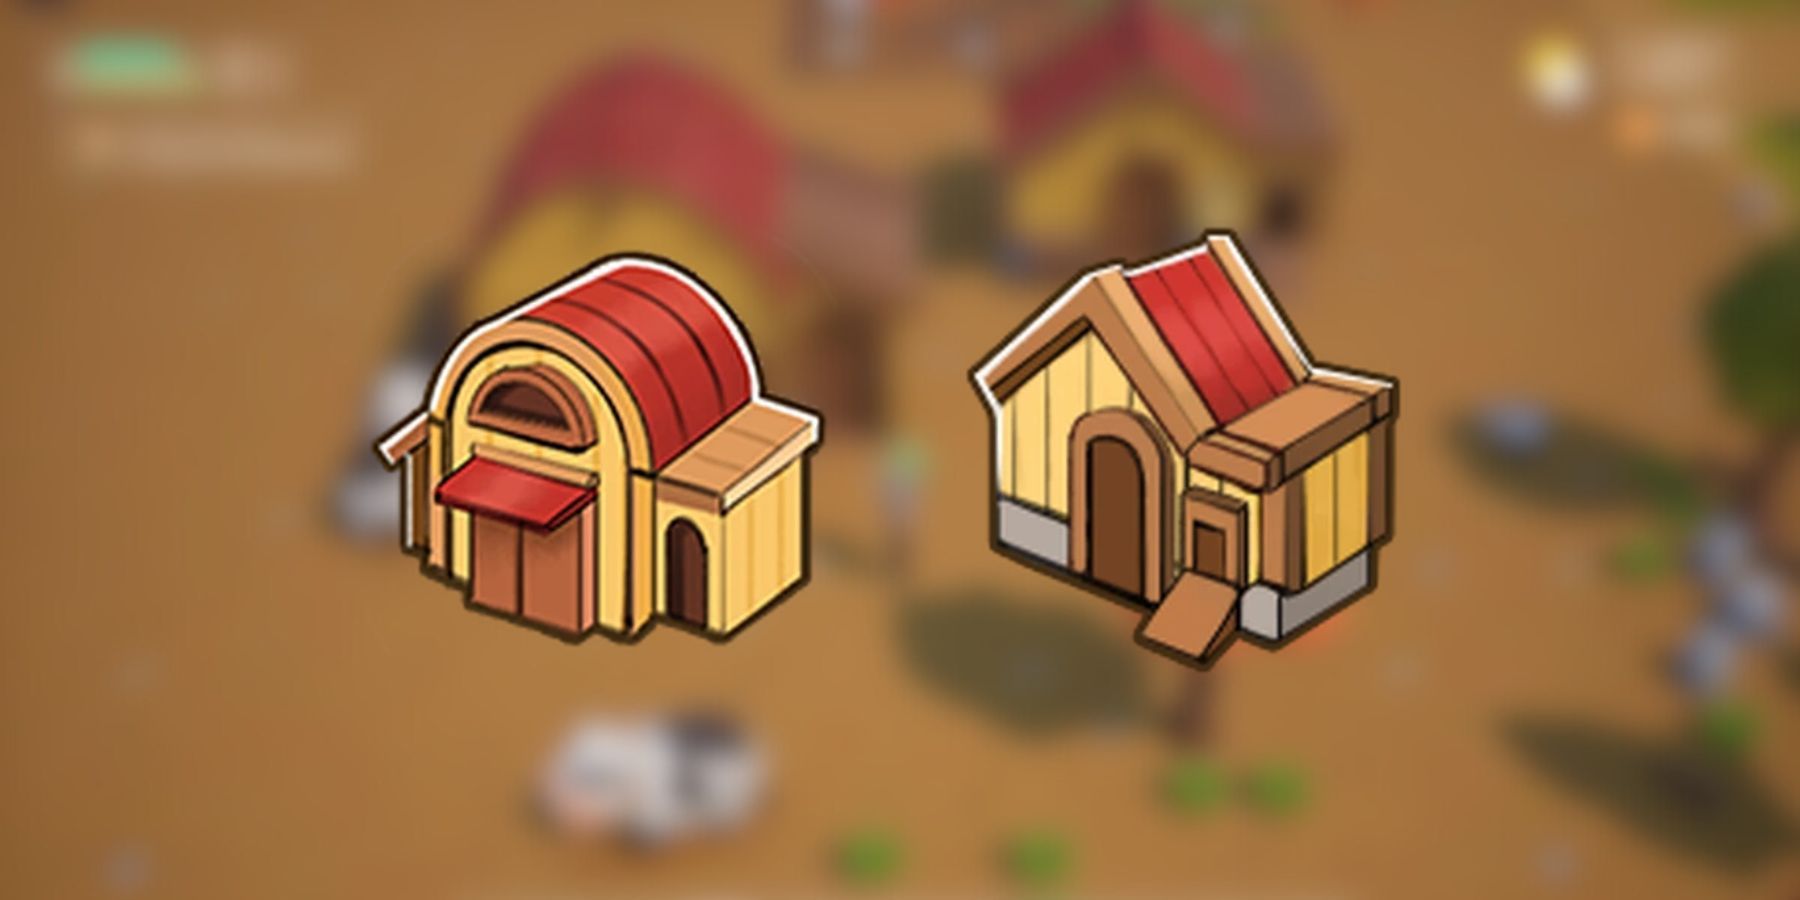 coop and barn structures in coral island.